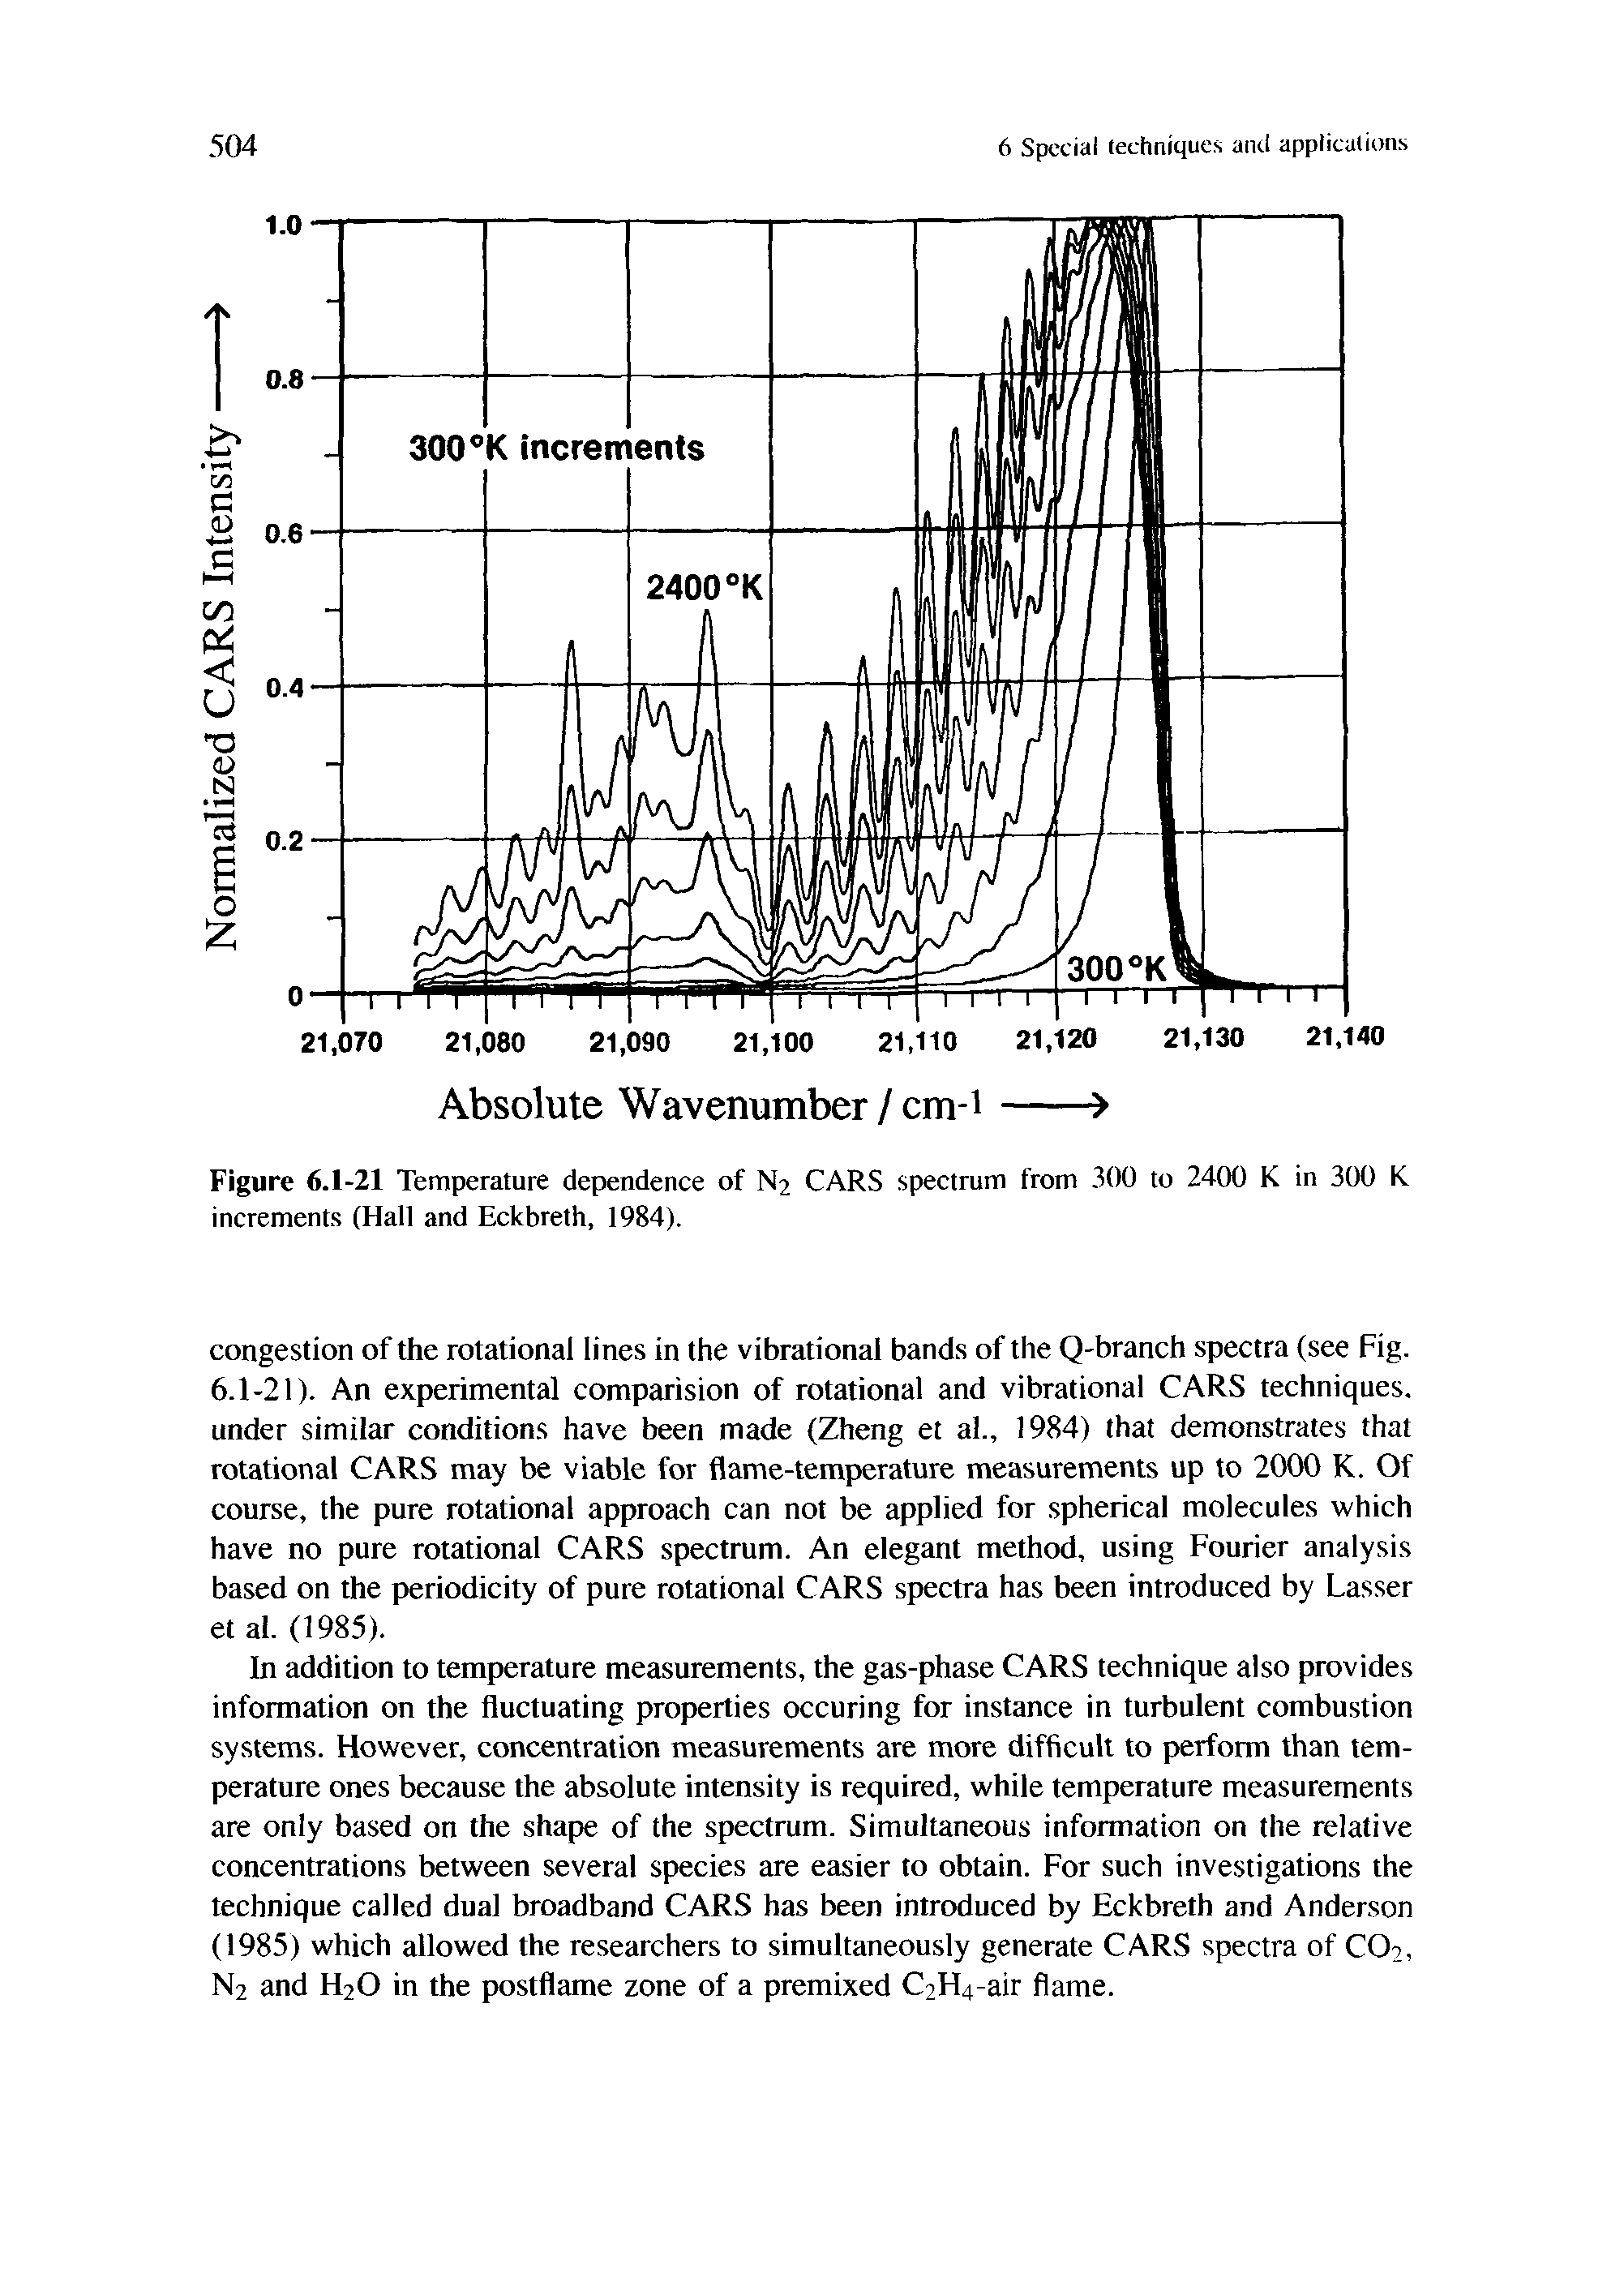 Figure 6.1-21 Temperature dependence of N2 CARS spectrum from 300 to 2400 K in 300 K increments (Hall and Eckbreth, 1984).